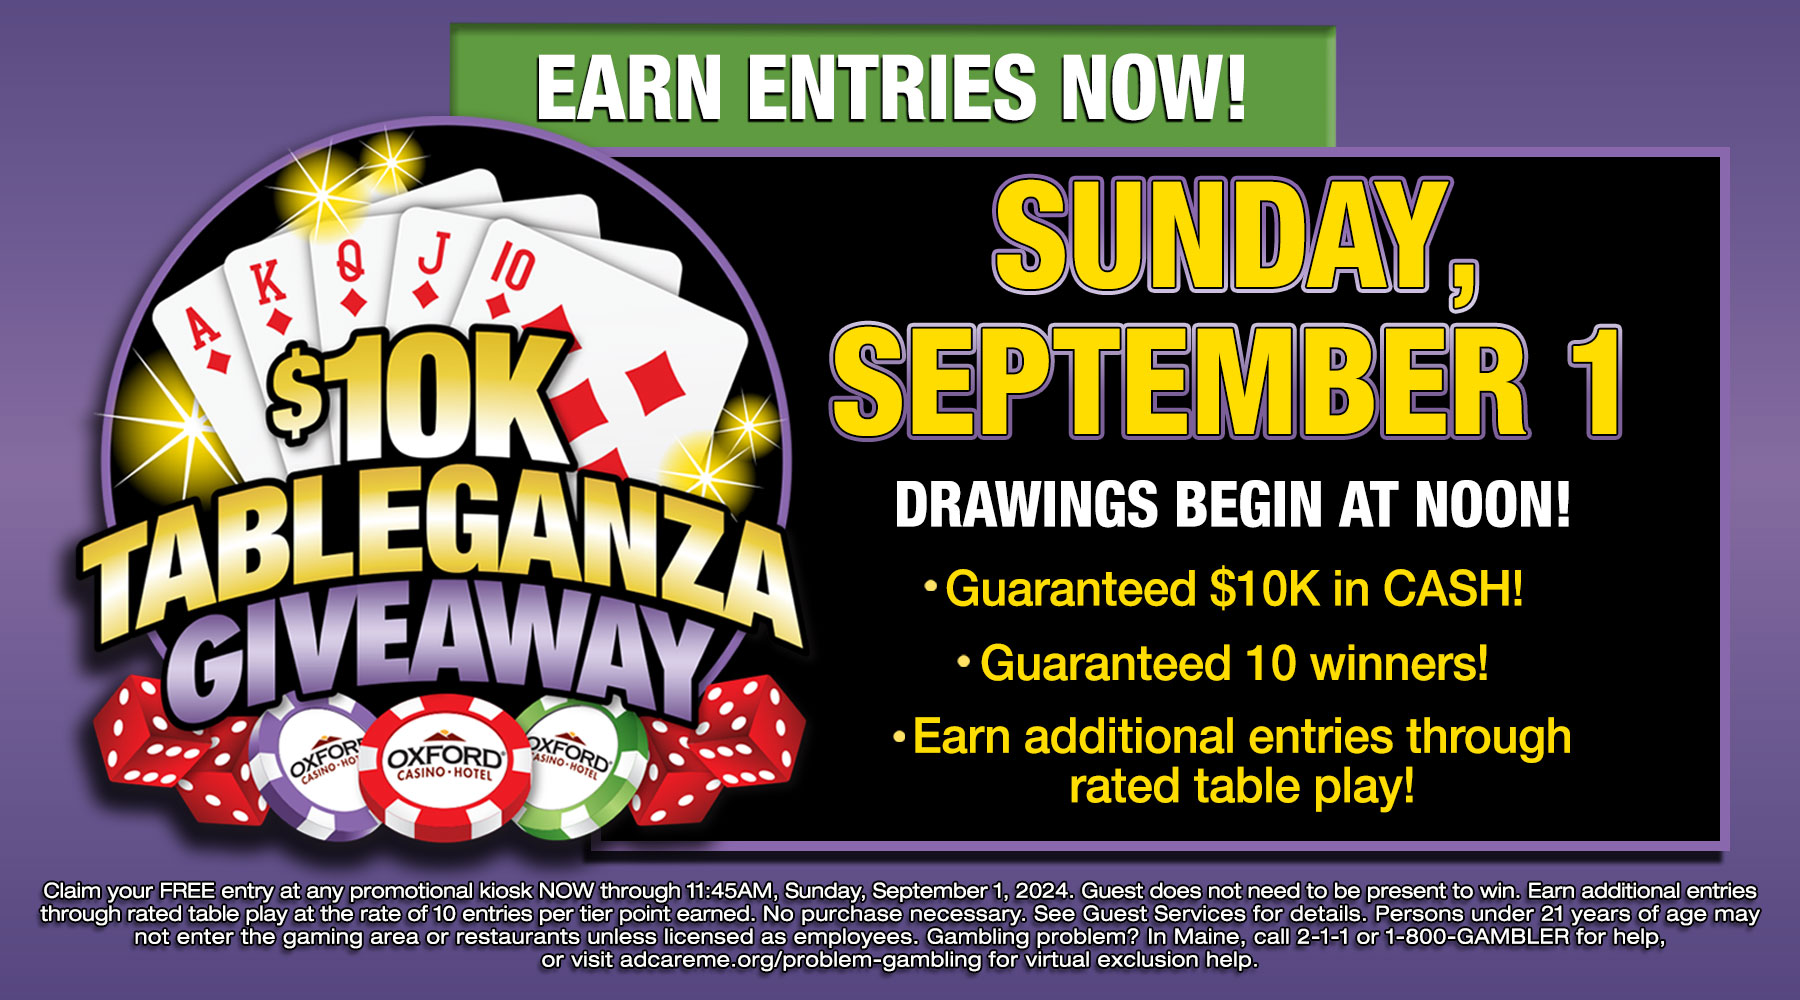 Earn entries NOW for the $10K Tableganza Giveaway at Oxford Casino Hotel